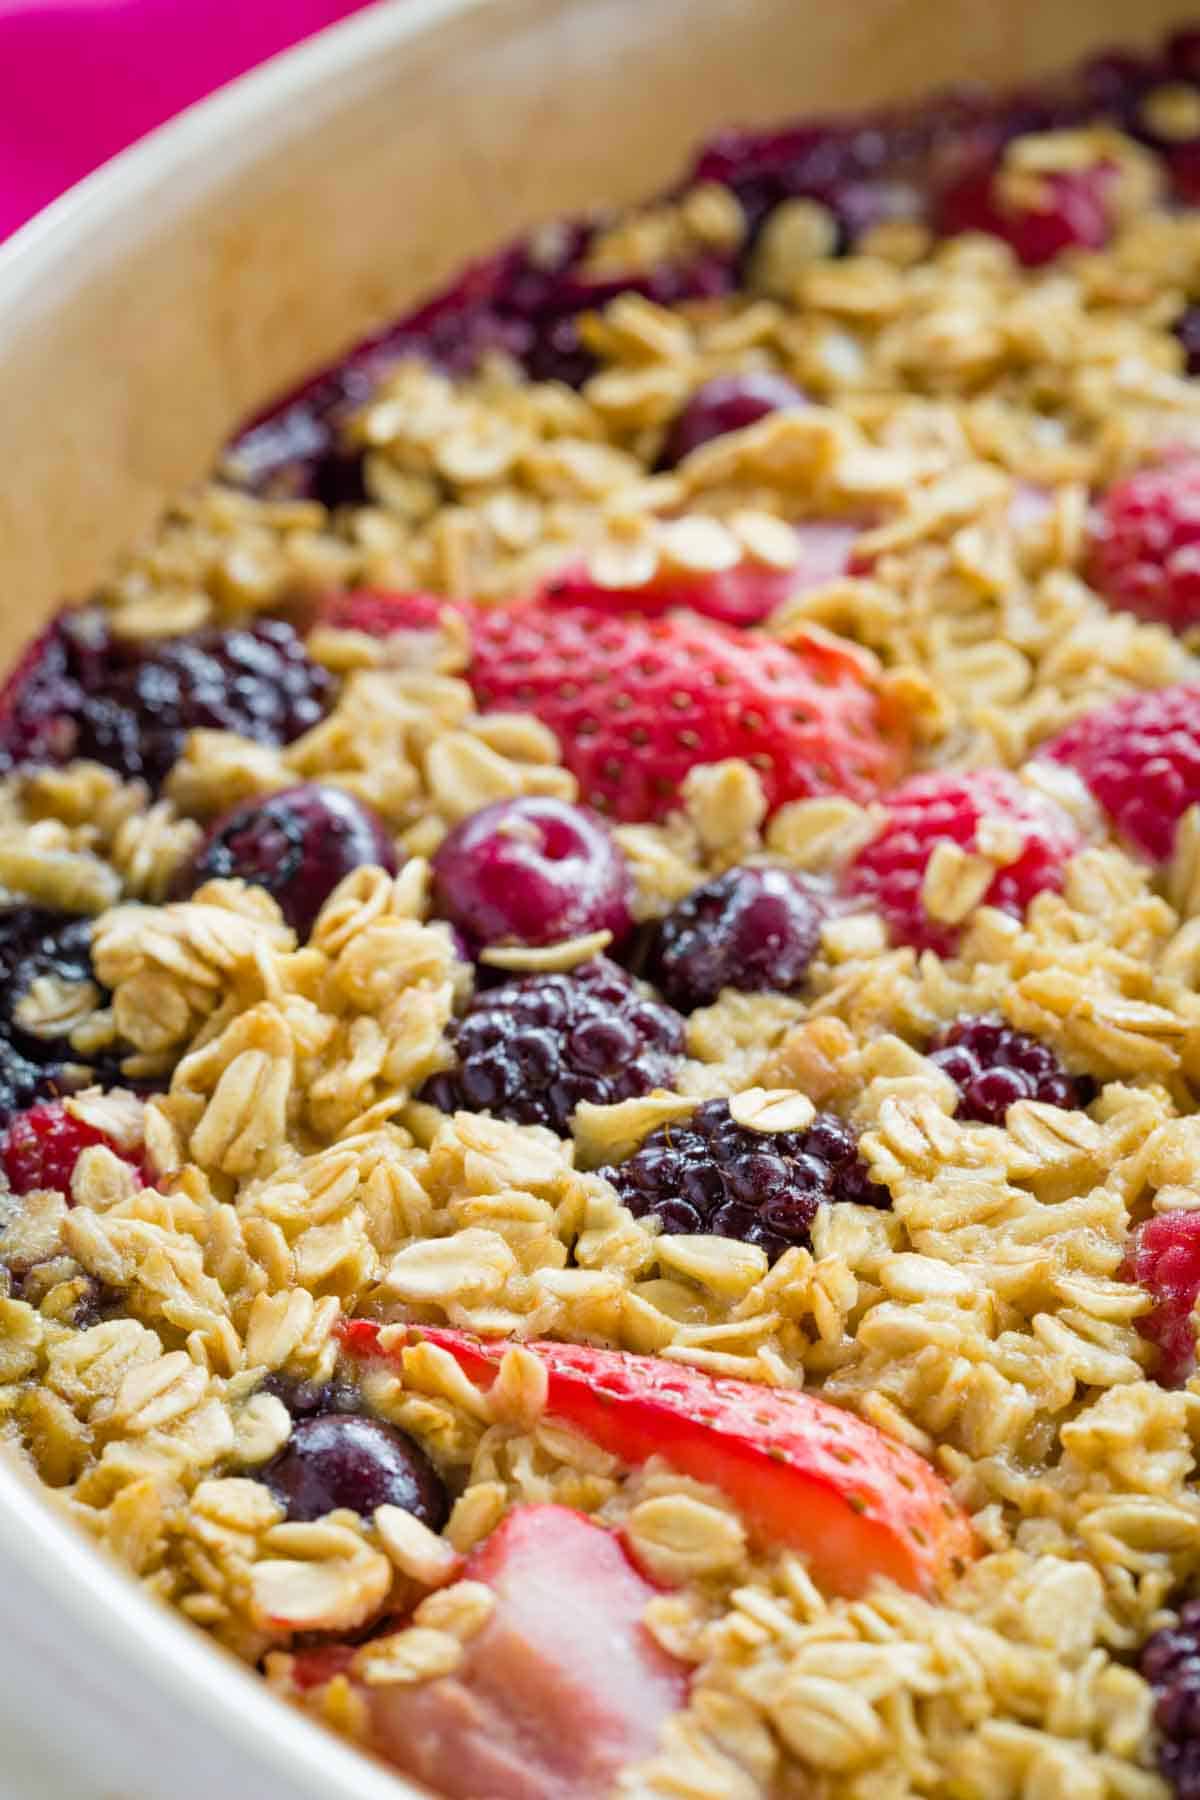 Closeup of Mixed Berry Baked Oatmeal with strawberries raspberries blackberries and blueberries.